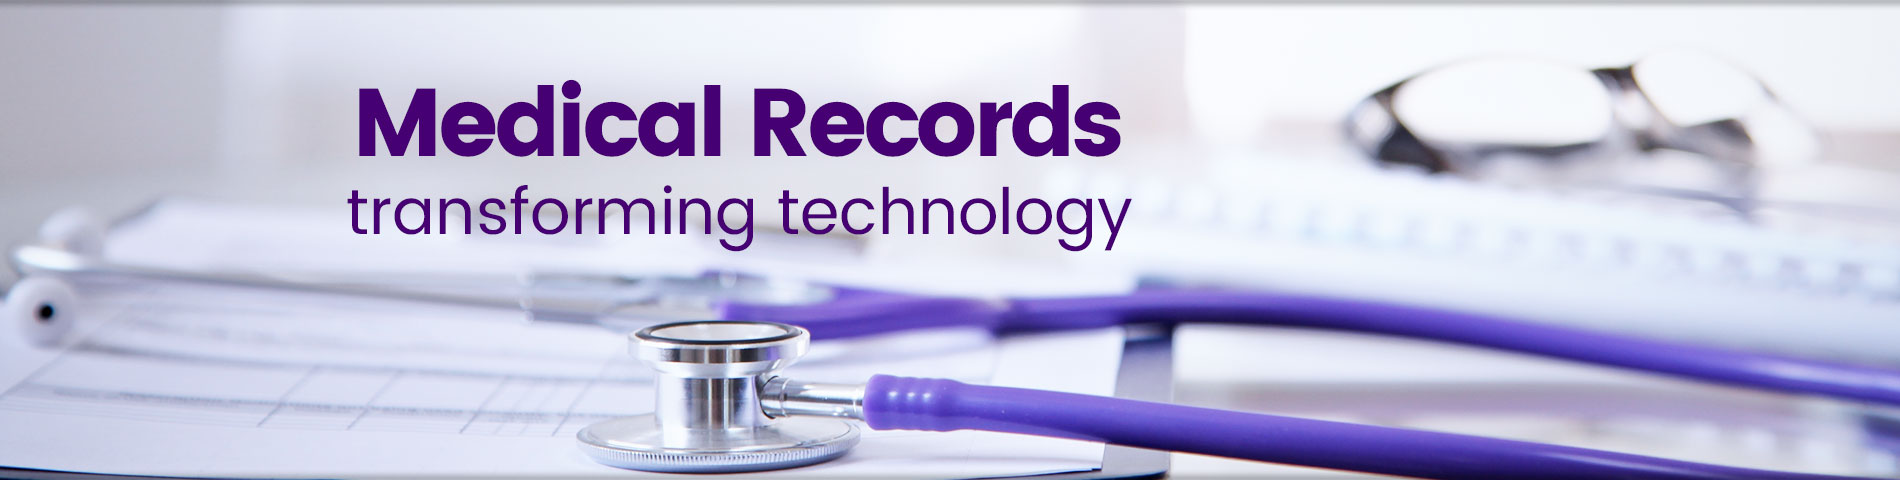 About Electronic Medical Records (EMR)